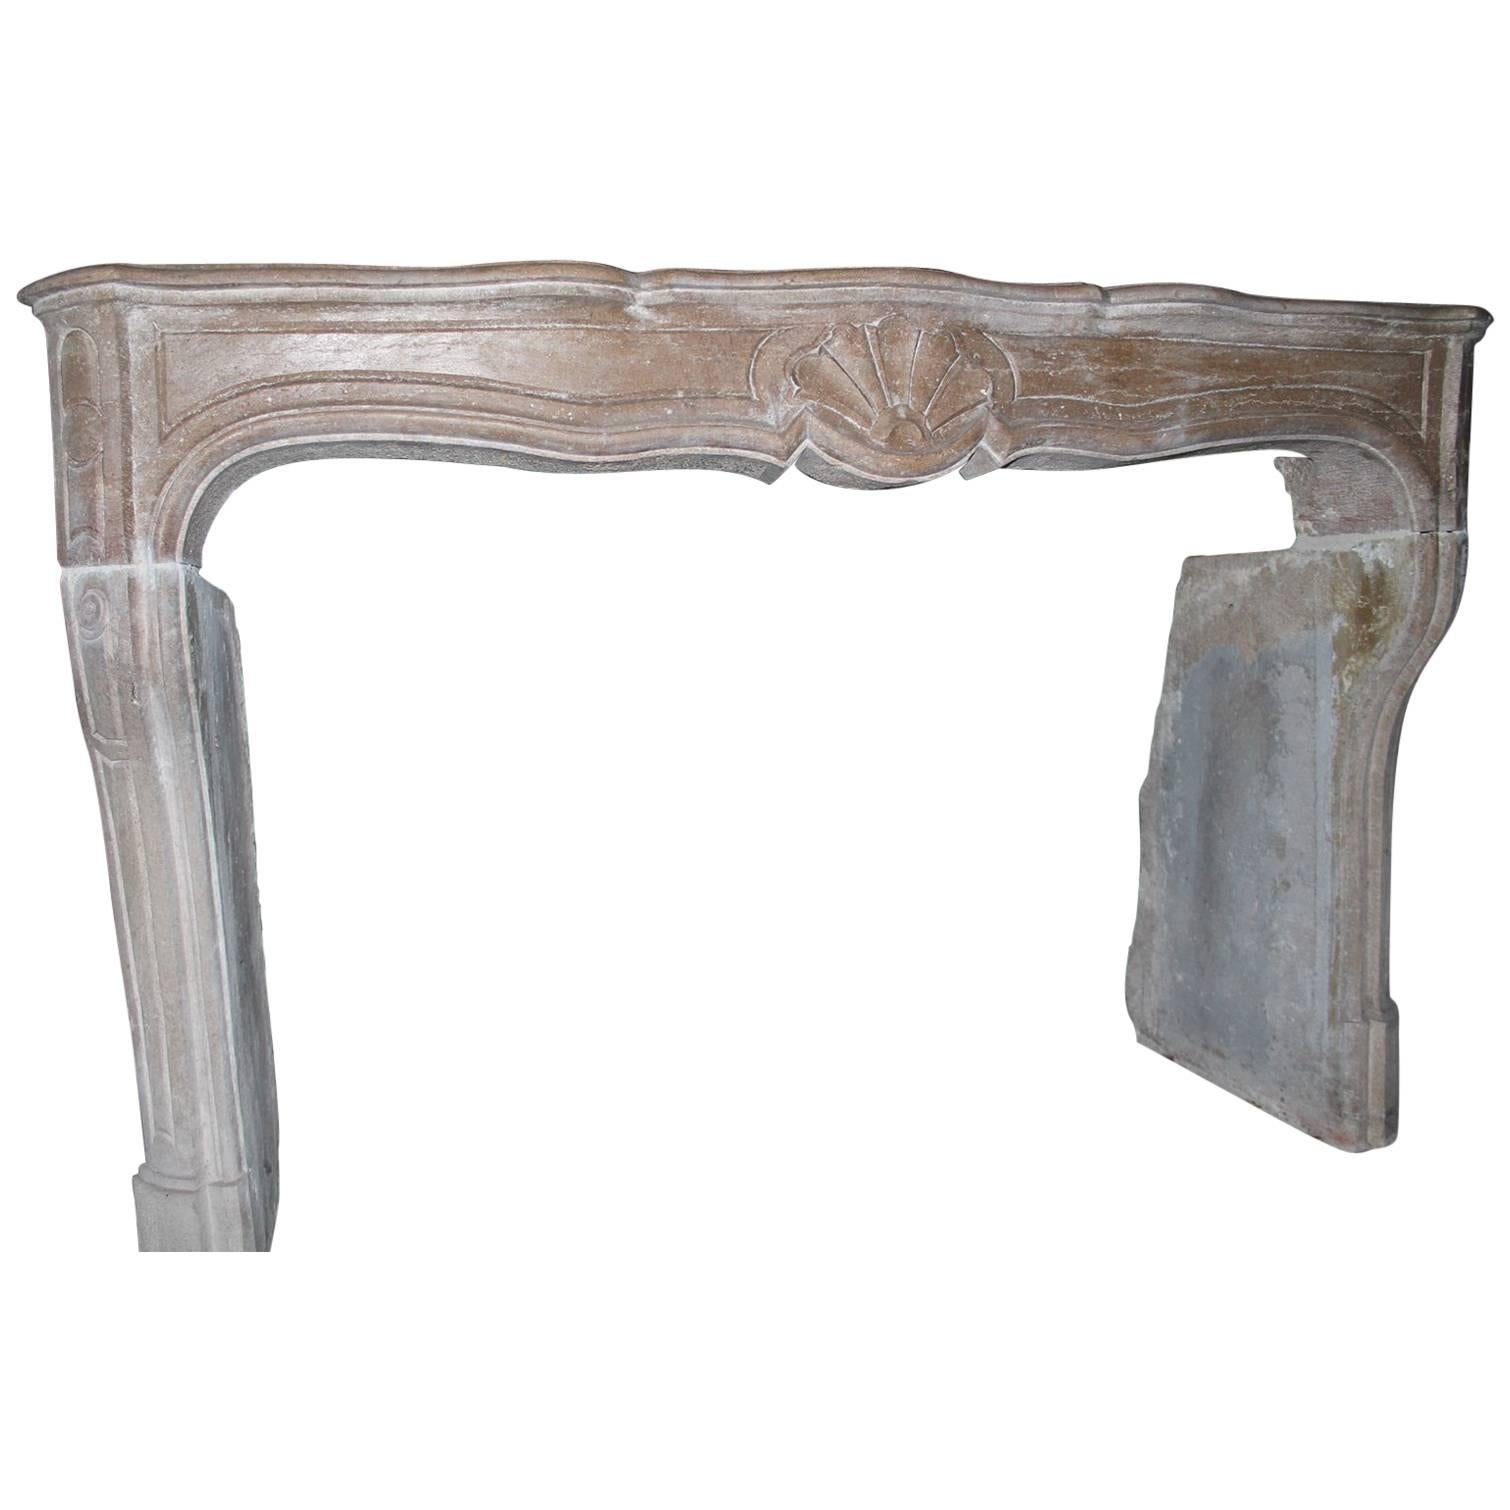 Beautiful Antique Marble Stone 18th Century Fireplace mantel For Sale